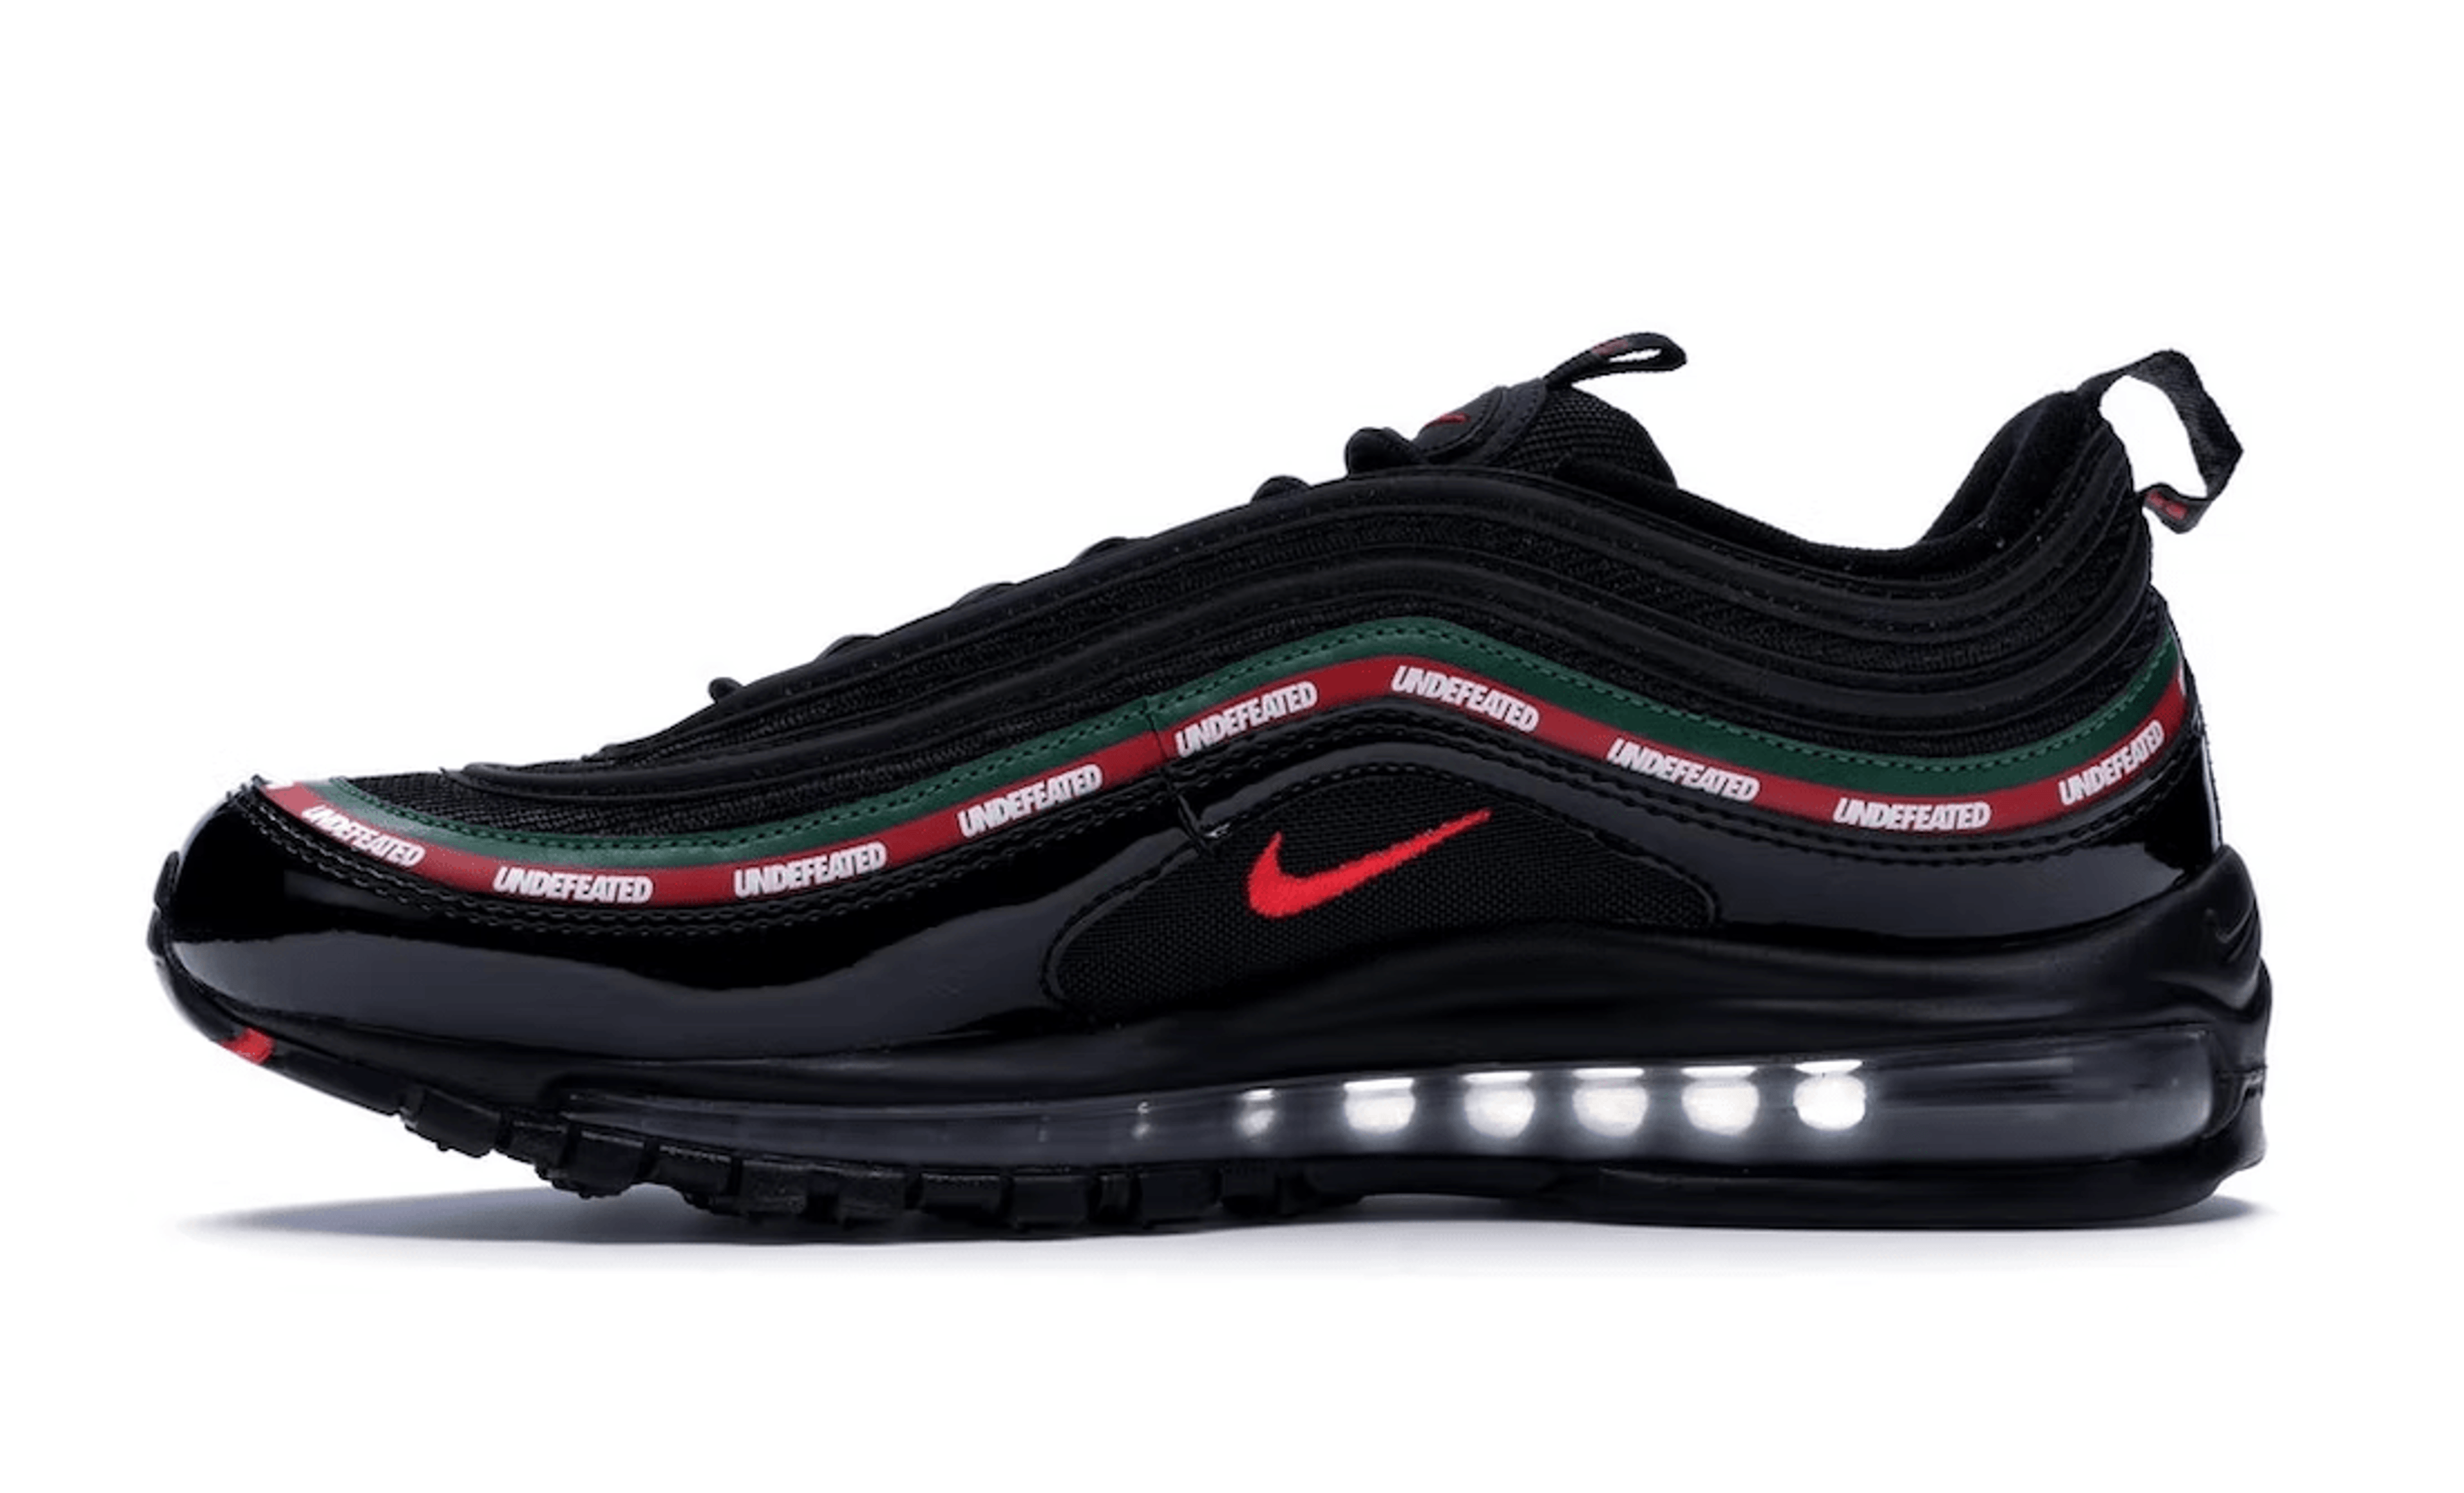 Alternate View 1 of Nike Air Max 97 Undefeated Black